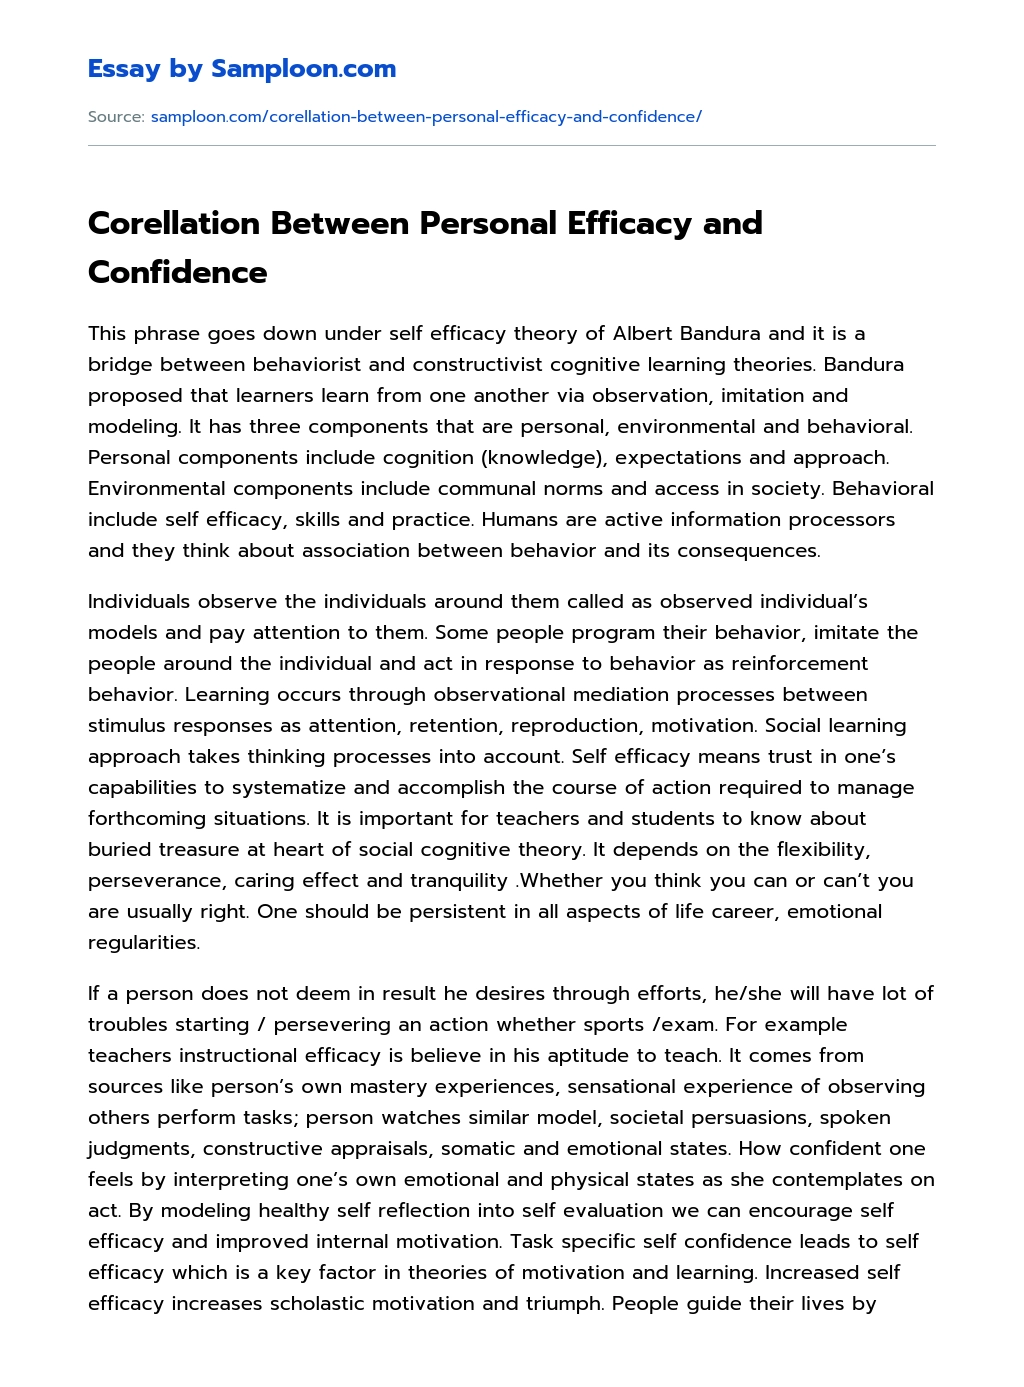 Corellation Between Personal Efficacy and Confidence essay